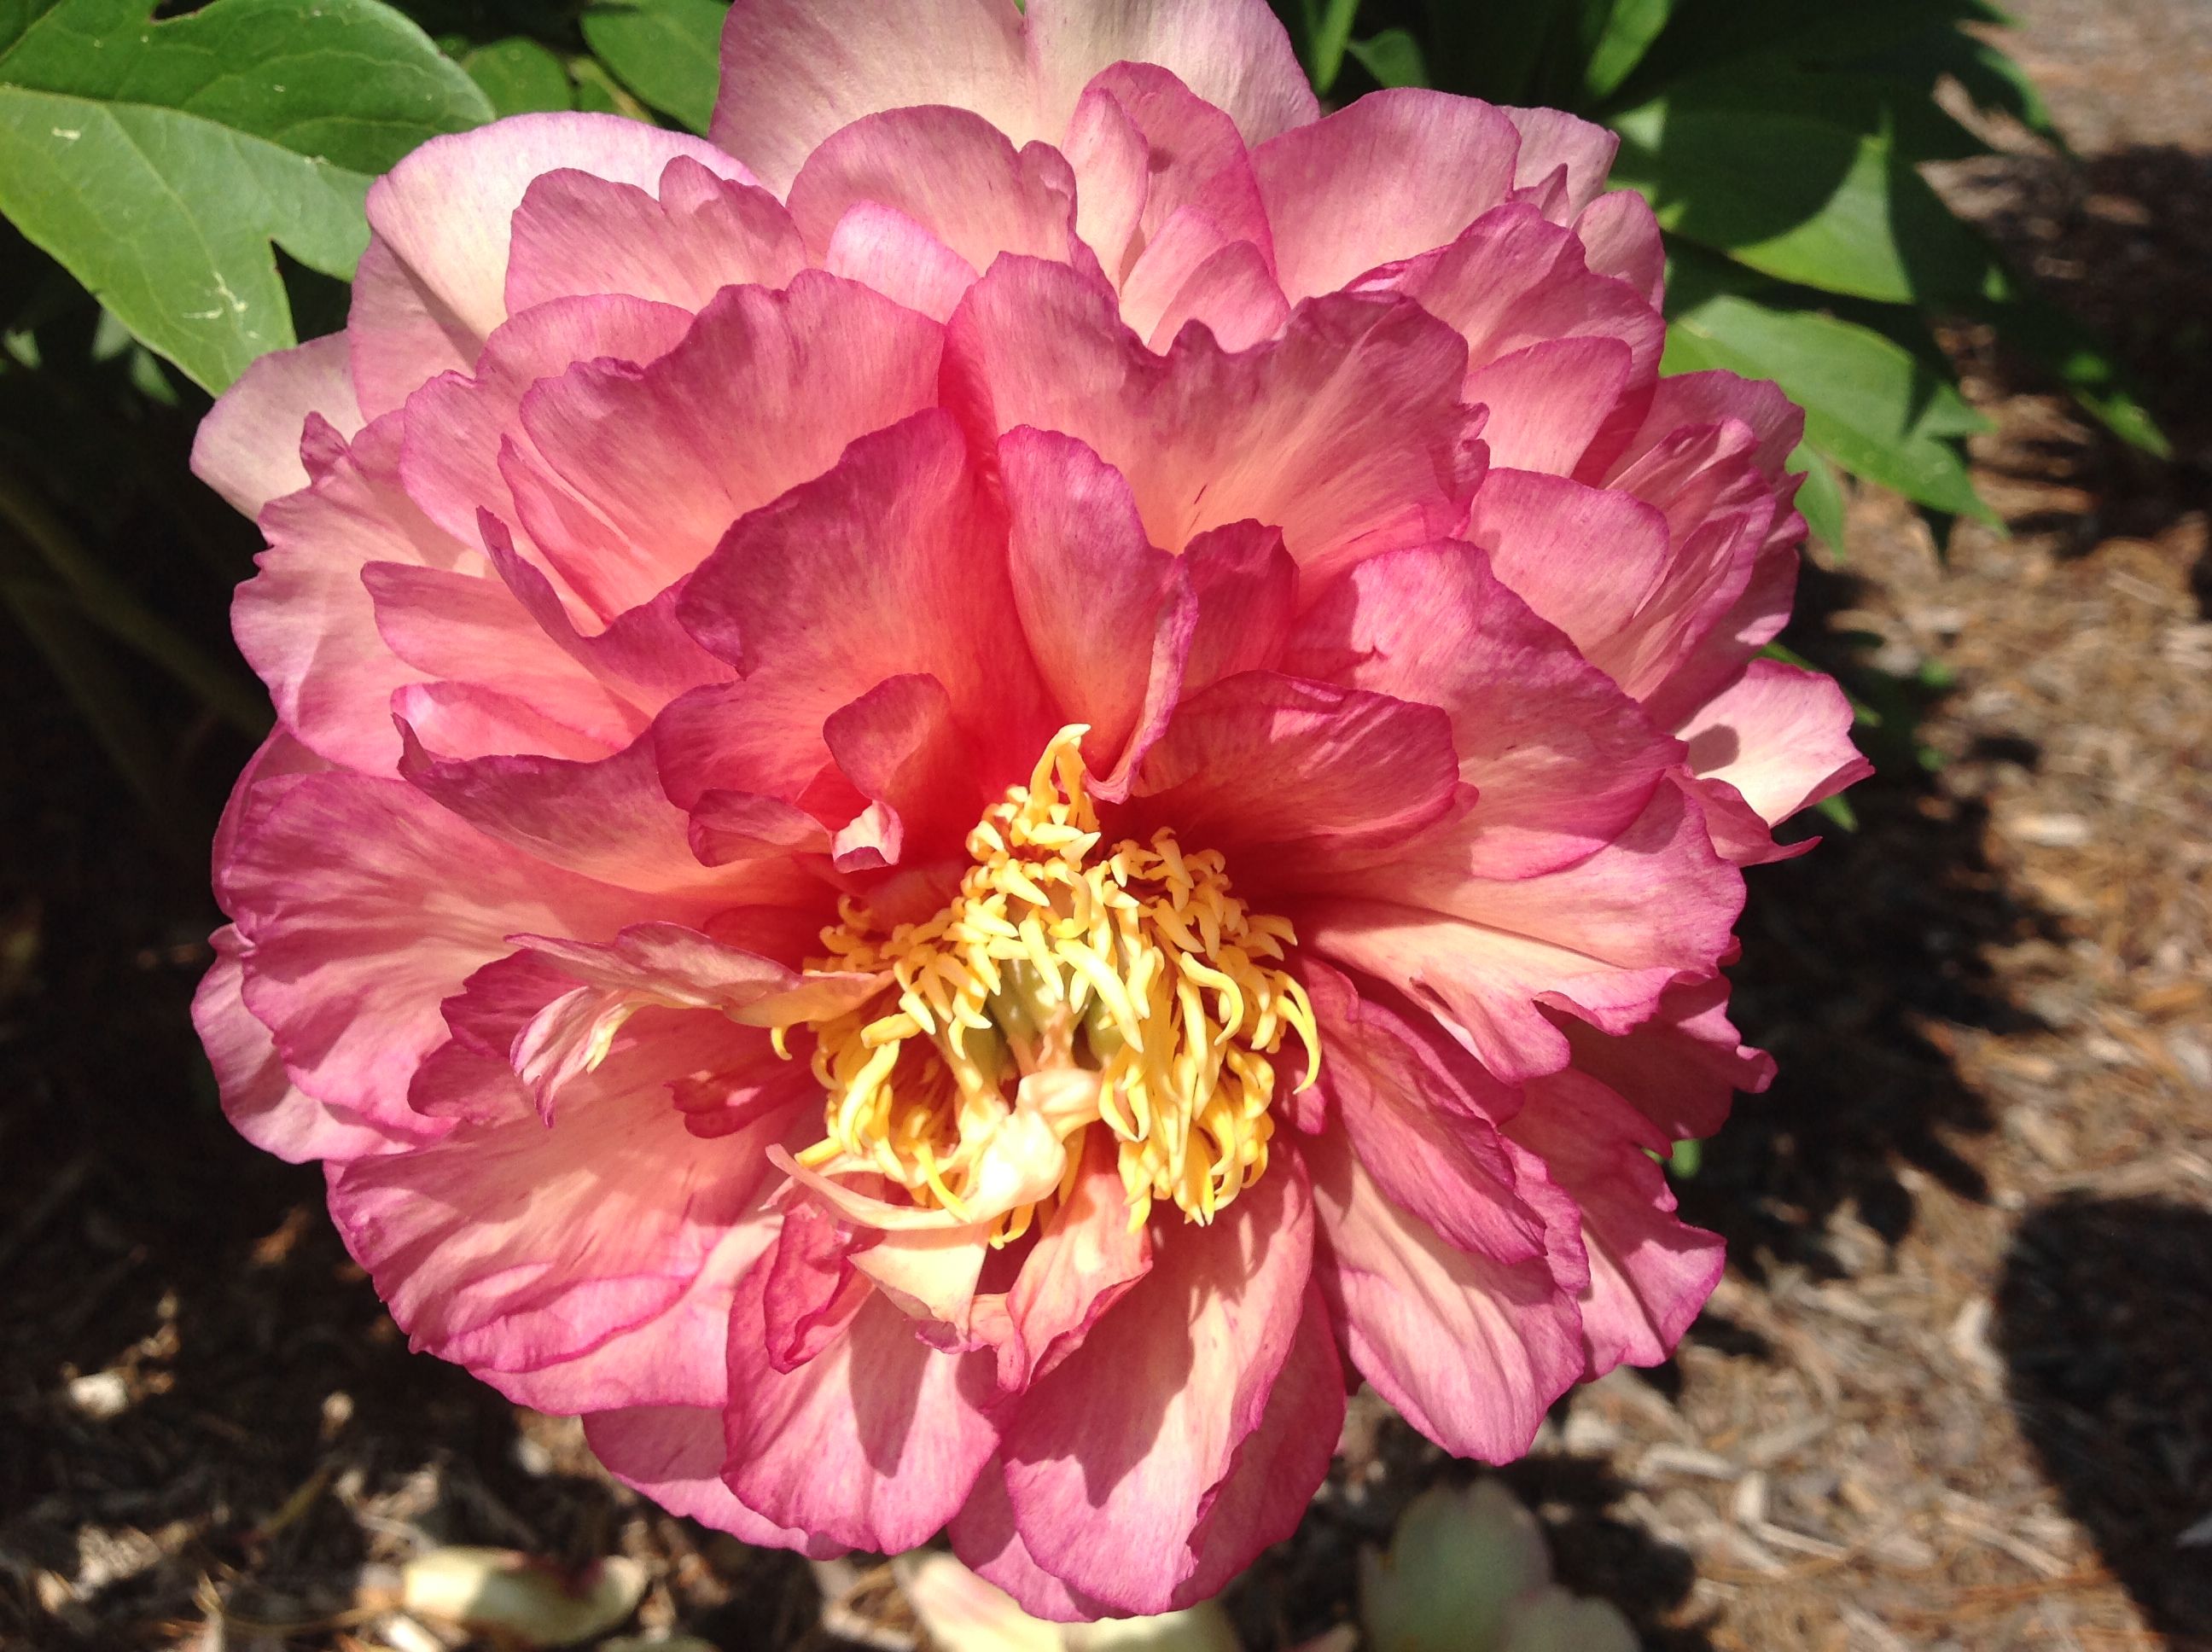 images/plants/paeonia/pae-truly-scrumptious/pae-truly-scrumptious-0008.JPG